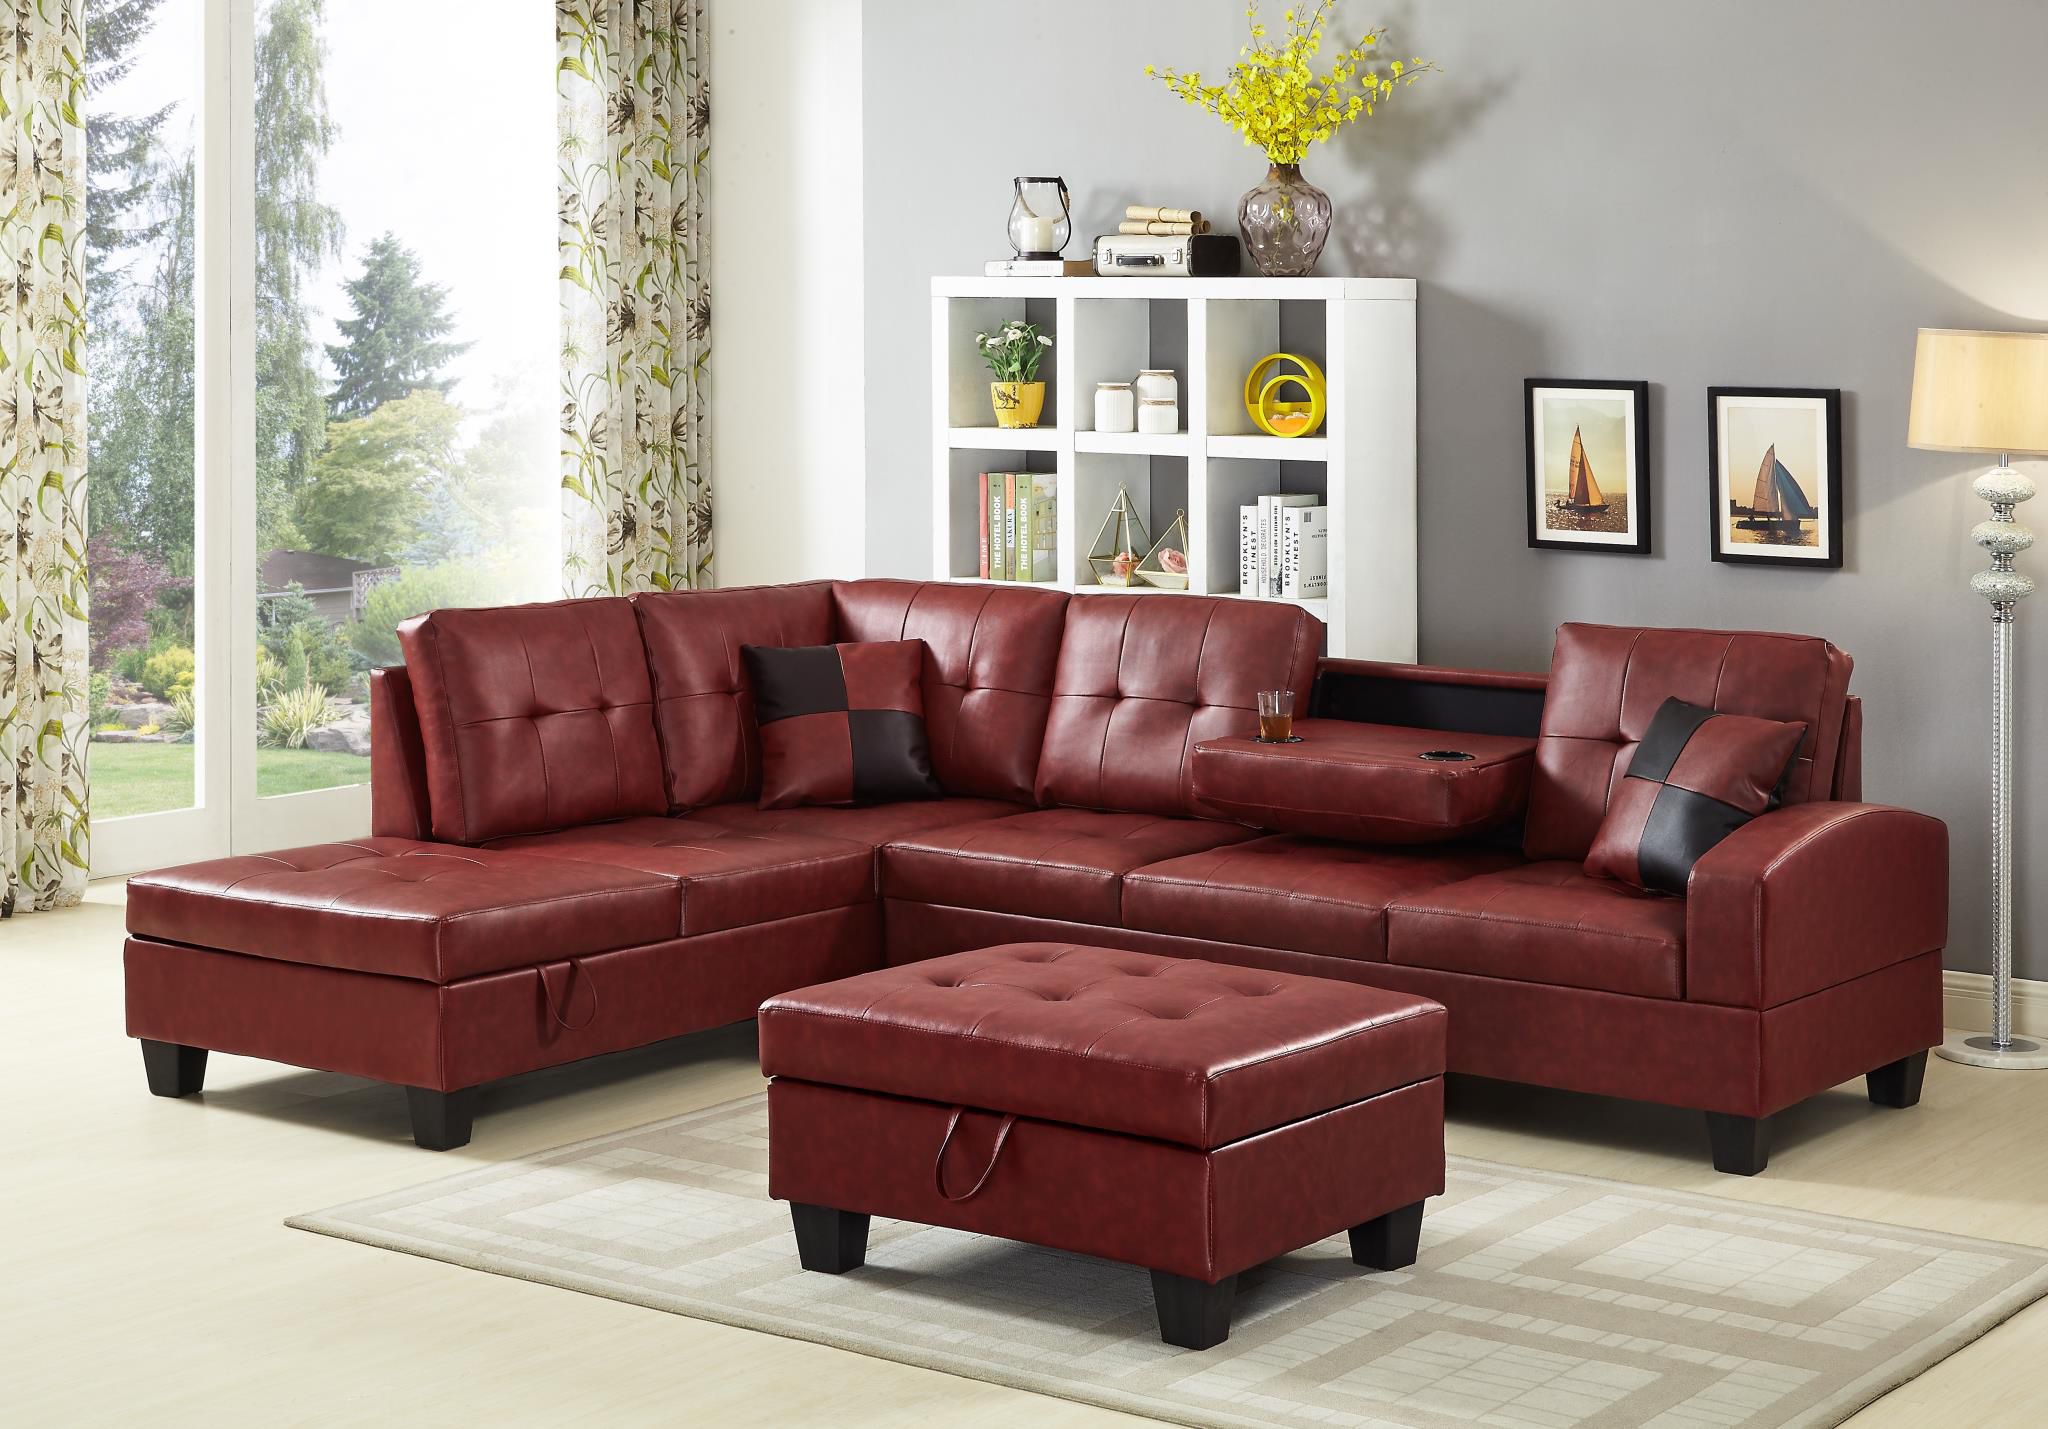 💥 SPECIAL SALES 💥 SECTIONAL & SOFA 🛋️  And OTTOMAN Free - All Come In Box 📦 - Free Delivery 🚚 Today To Reasonable Distance